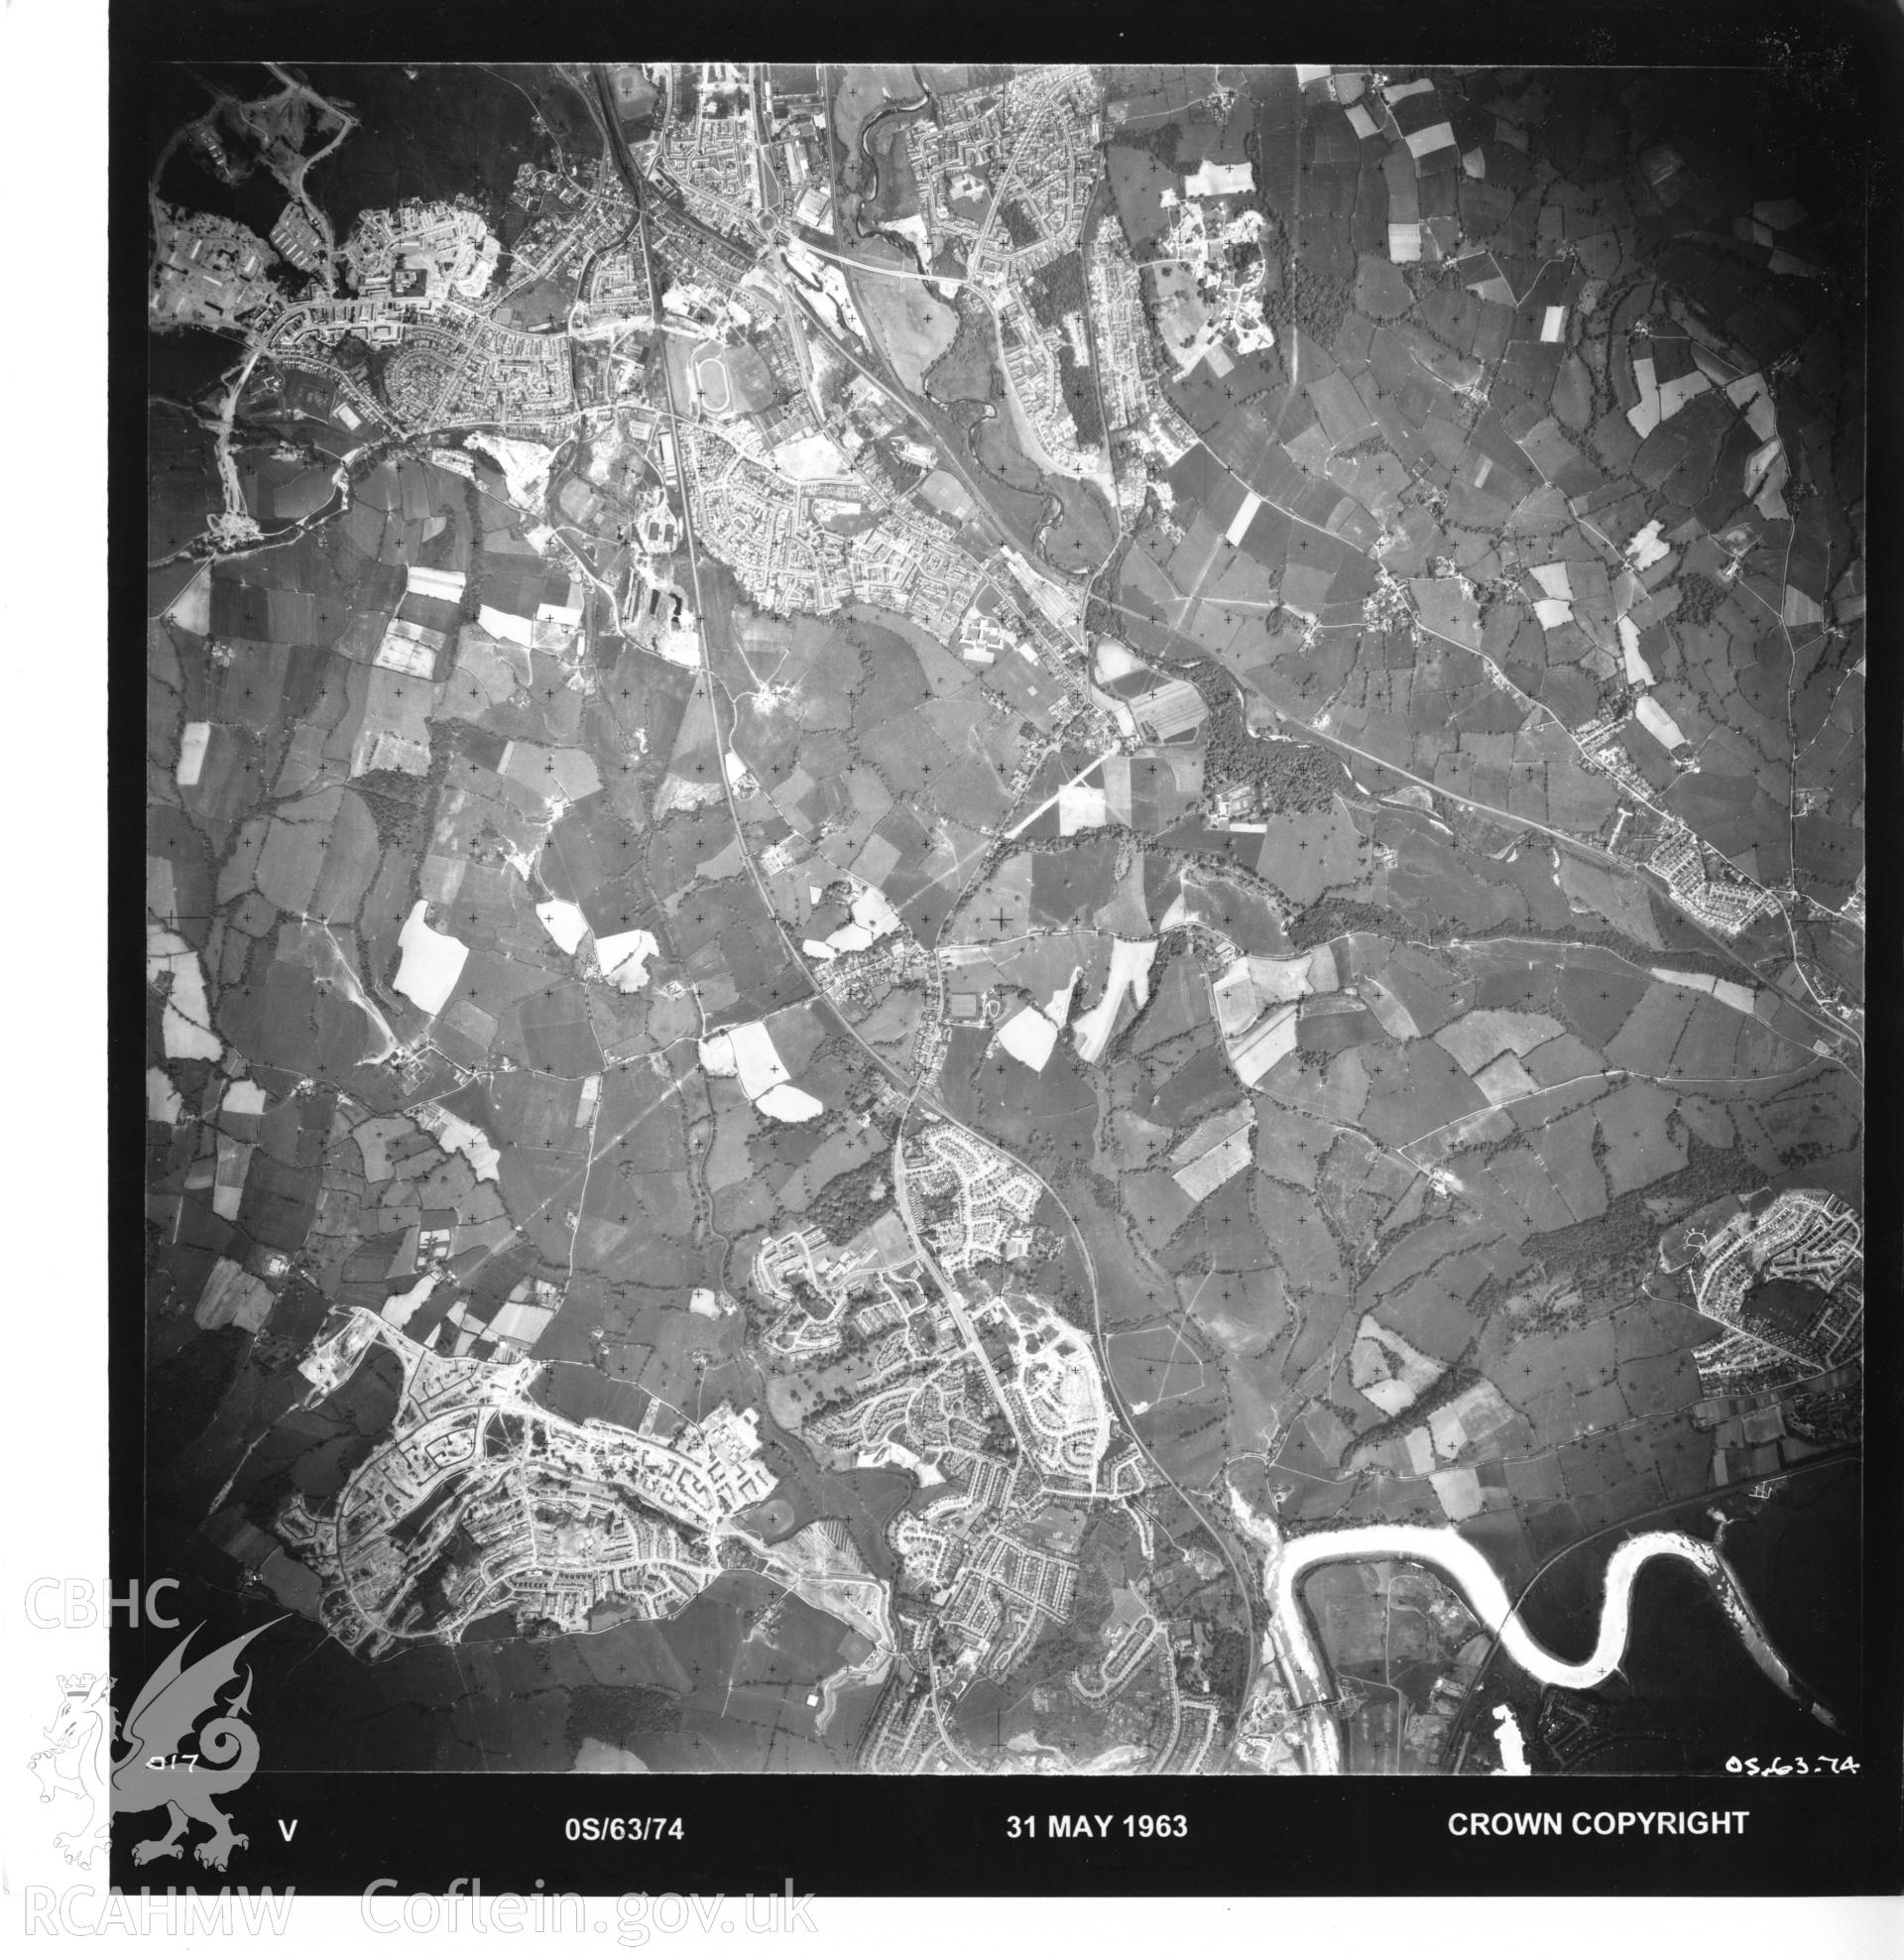 Aerial photograph of Cwmbran, taken on 31st May 1963. Included as part of Archaeology Wales' desk based assessment of former Llantarnam Community Primary School, Croeswen, Oakfield, Cwmbran, conducted in 2017.